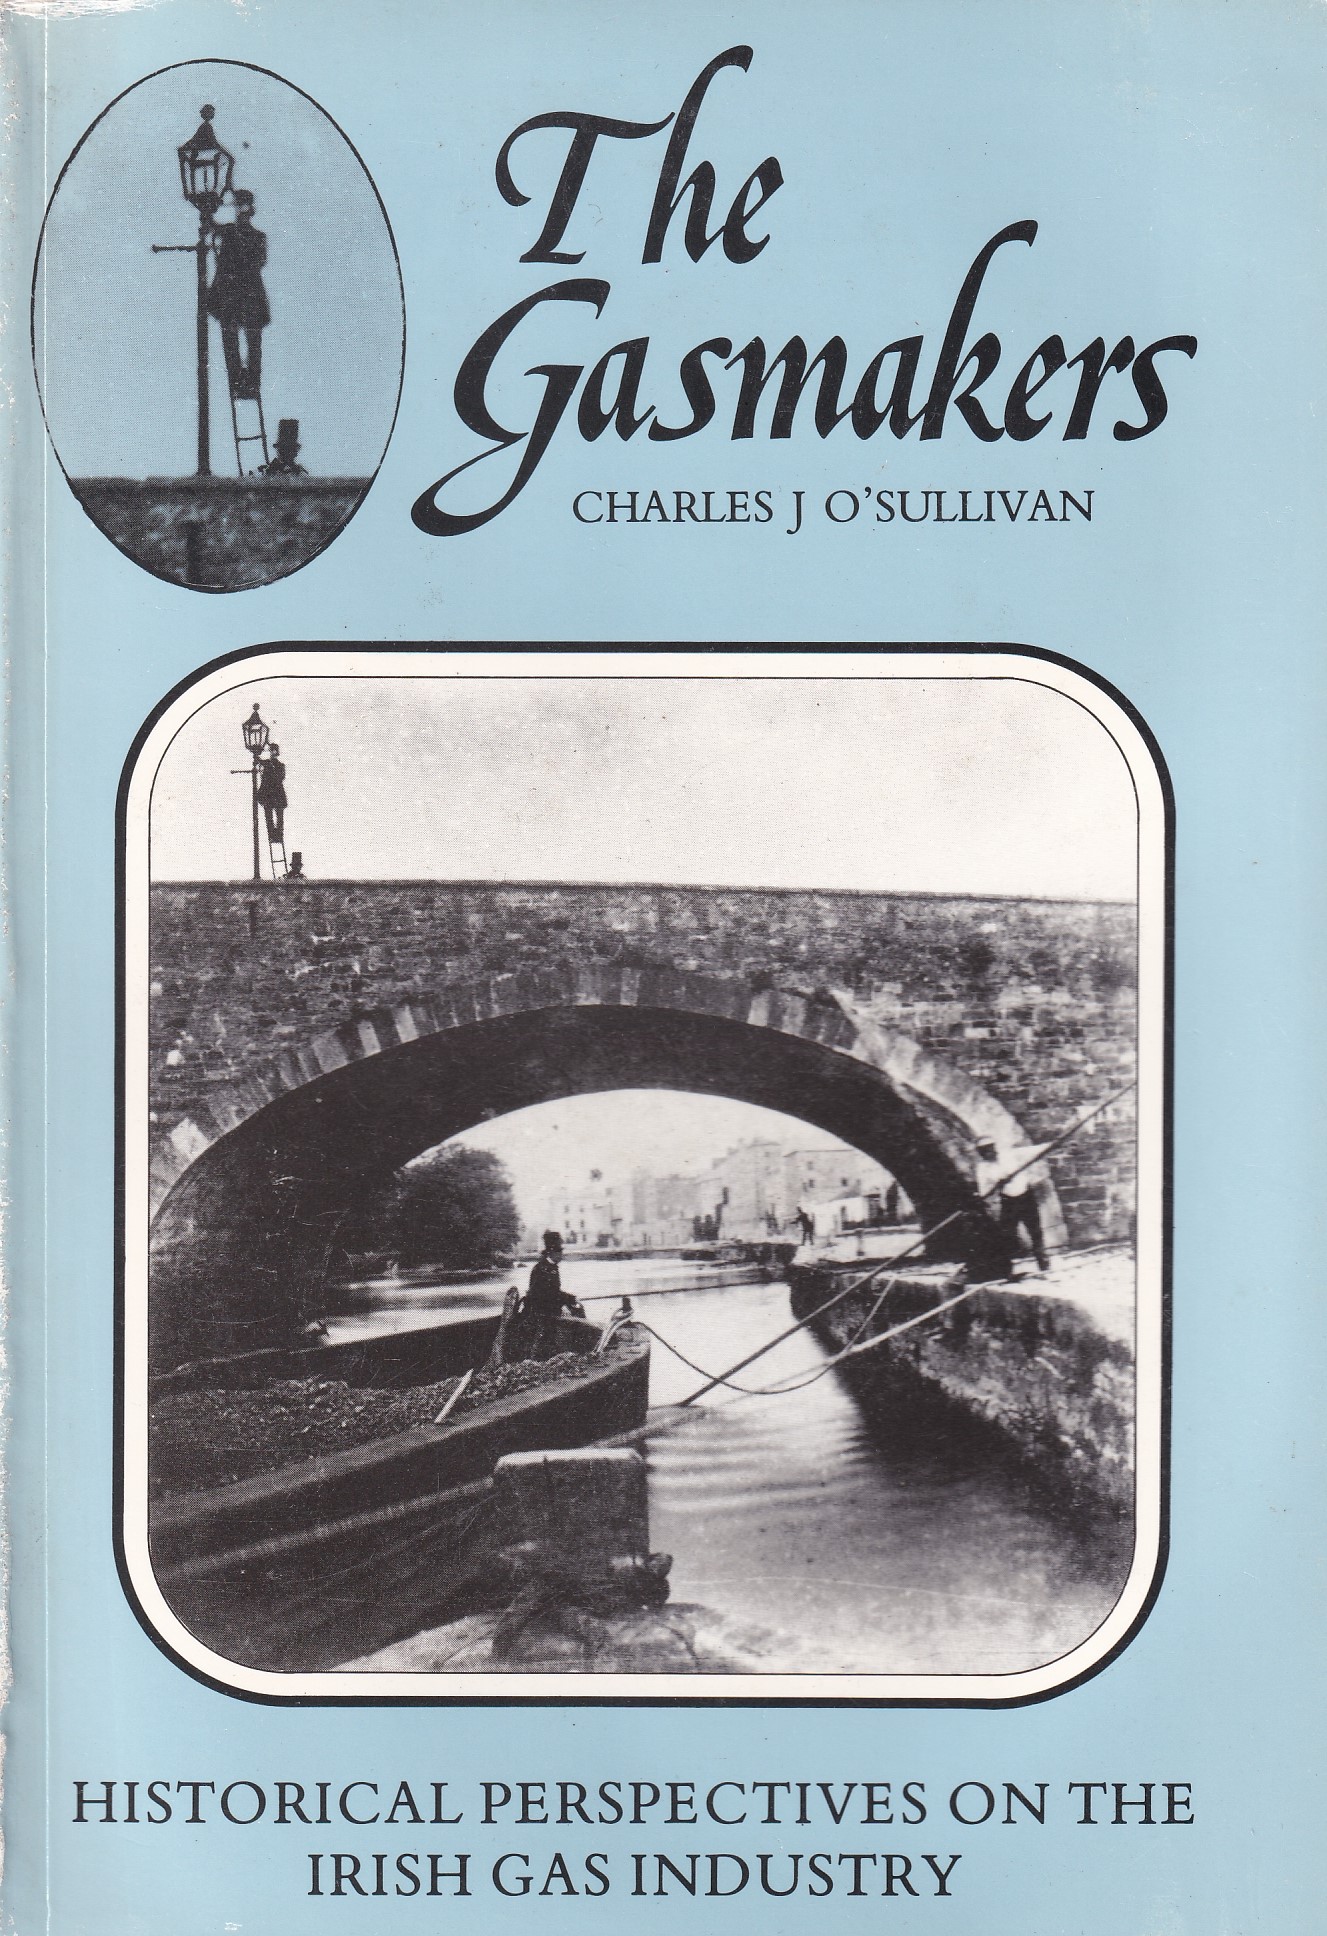 The Gasmakers: Historical Perspectives on the Irish Gas Industry | Charles J. O'Sullivan | Charlie Byrne's